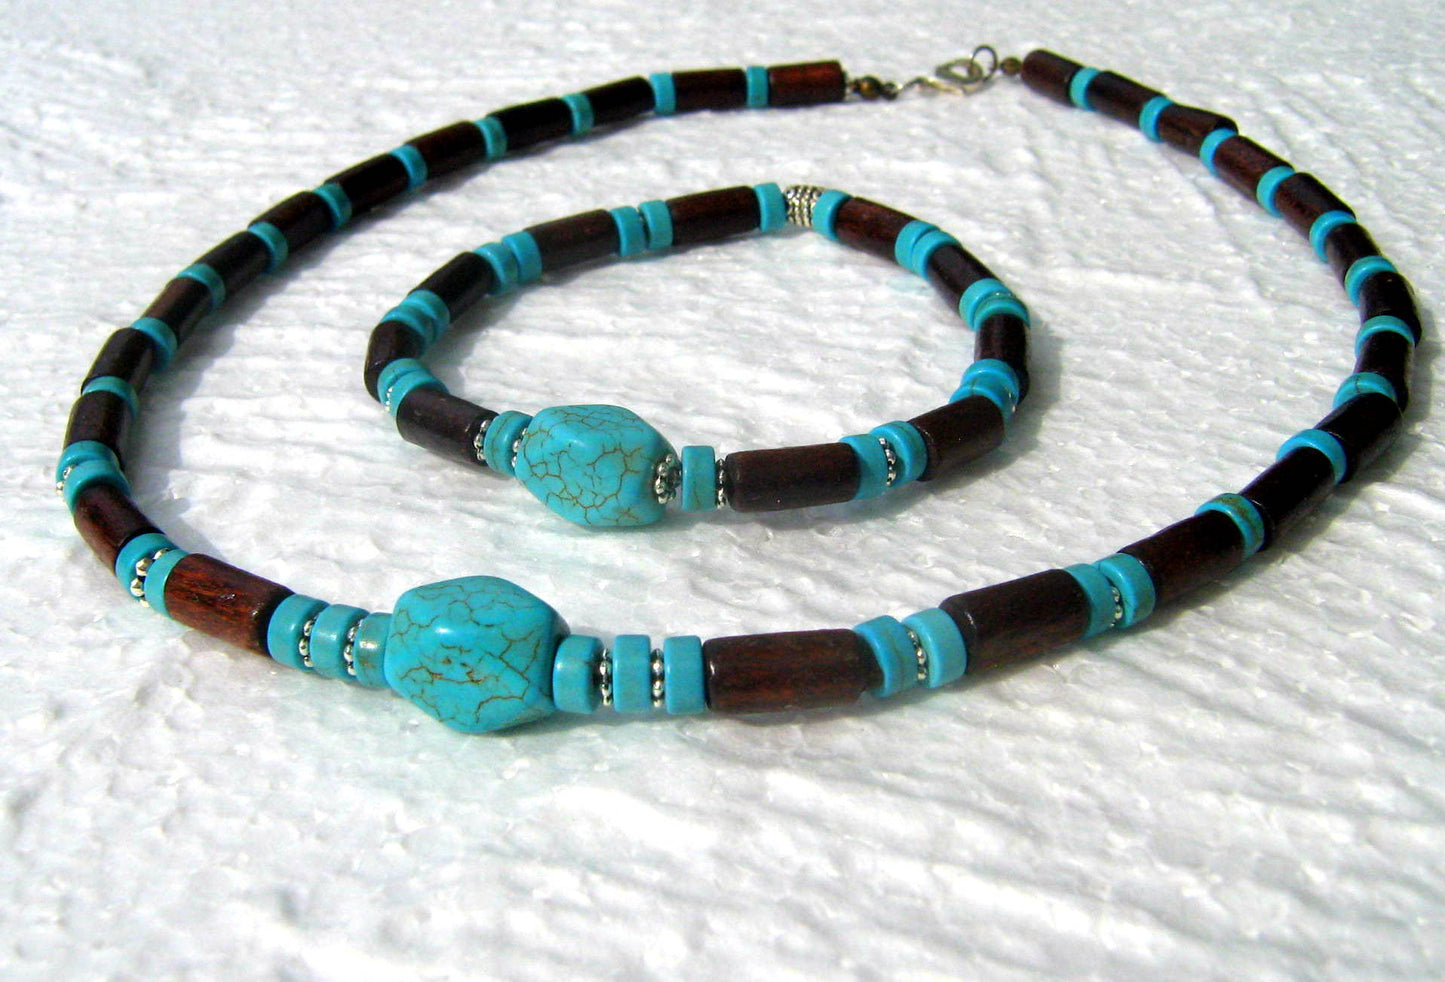 CAMELYS MAGIC 4 MEN - Men Necklace Turquoise stone Cocowood beads Tribal bohemian handmade necklace Men Gift